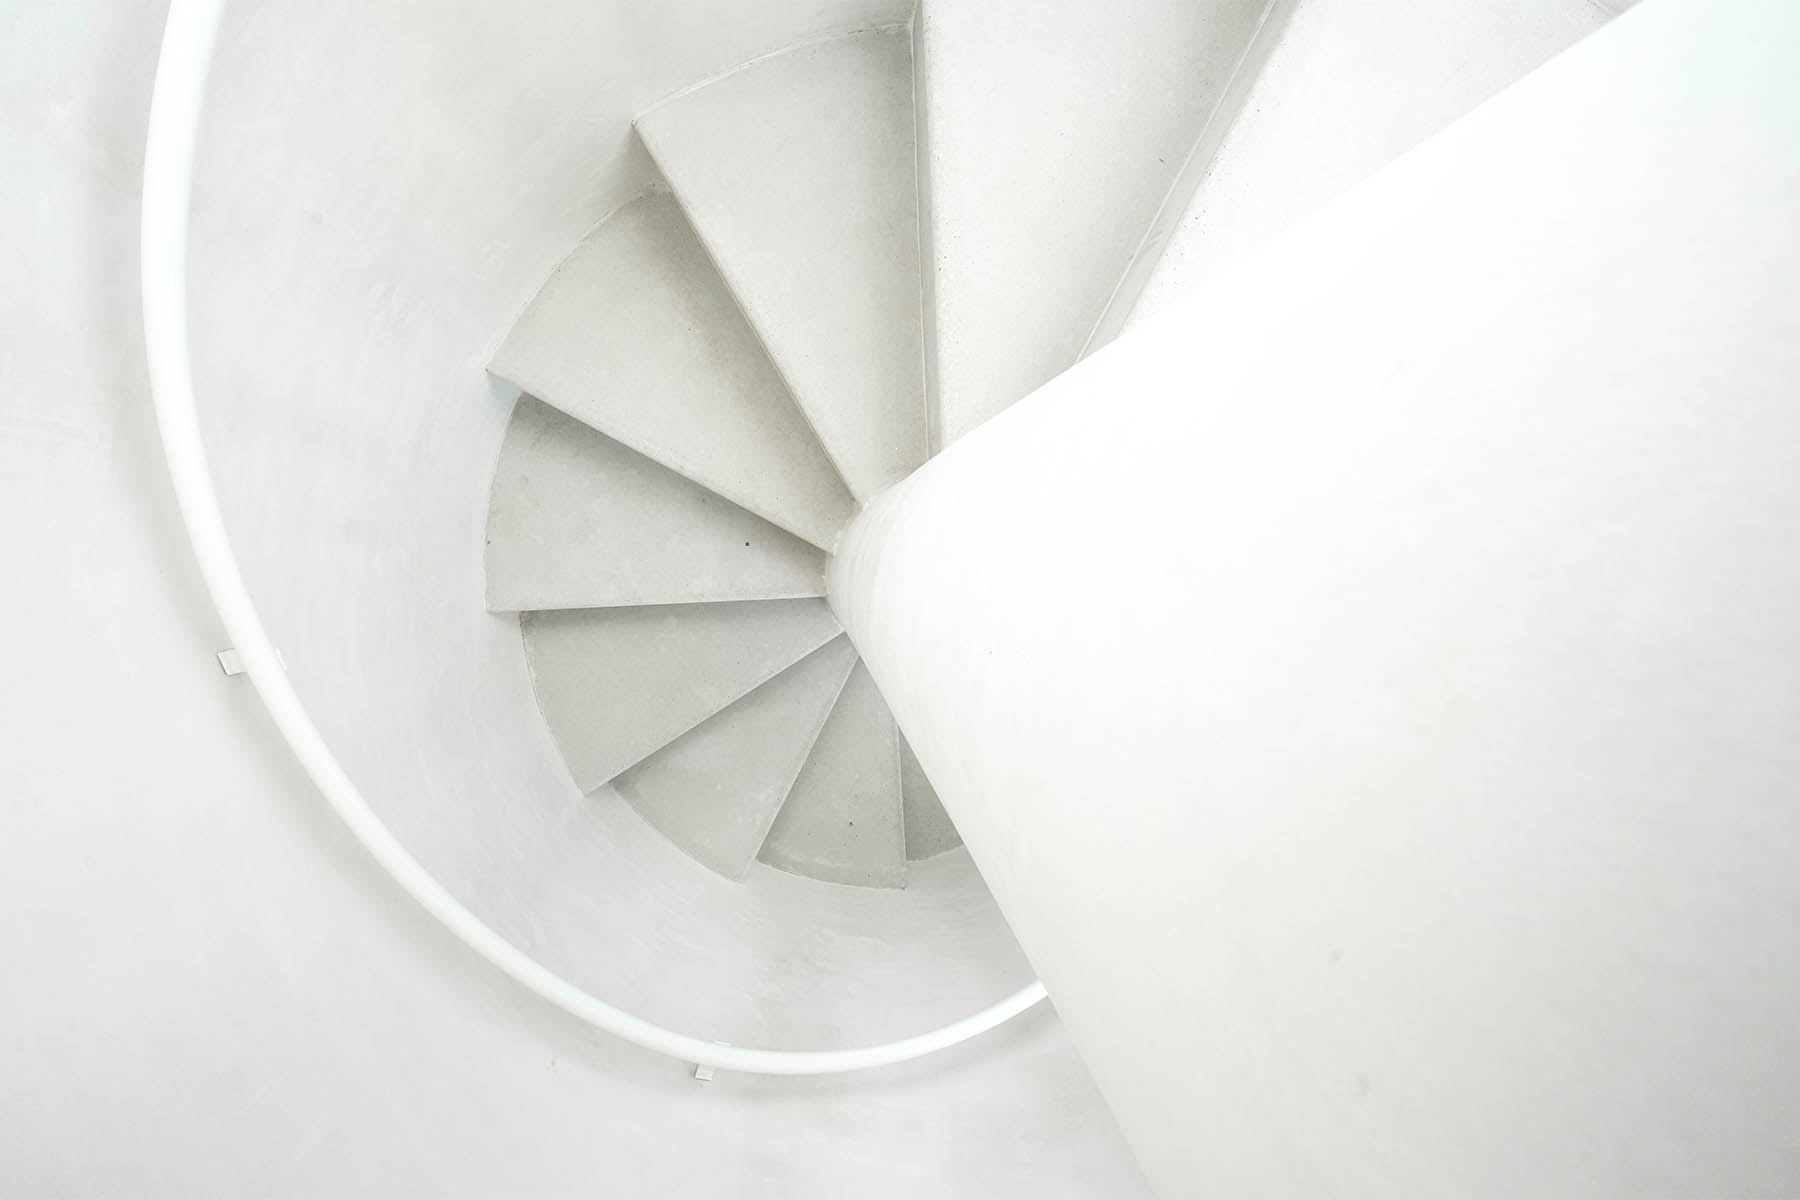 Top-down view of the spiral concrete staircase